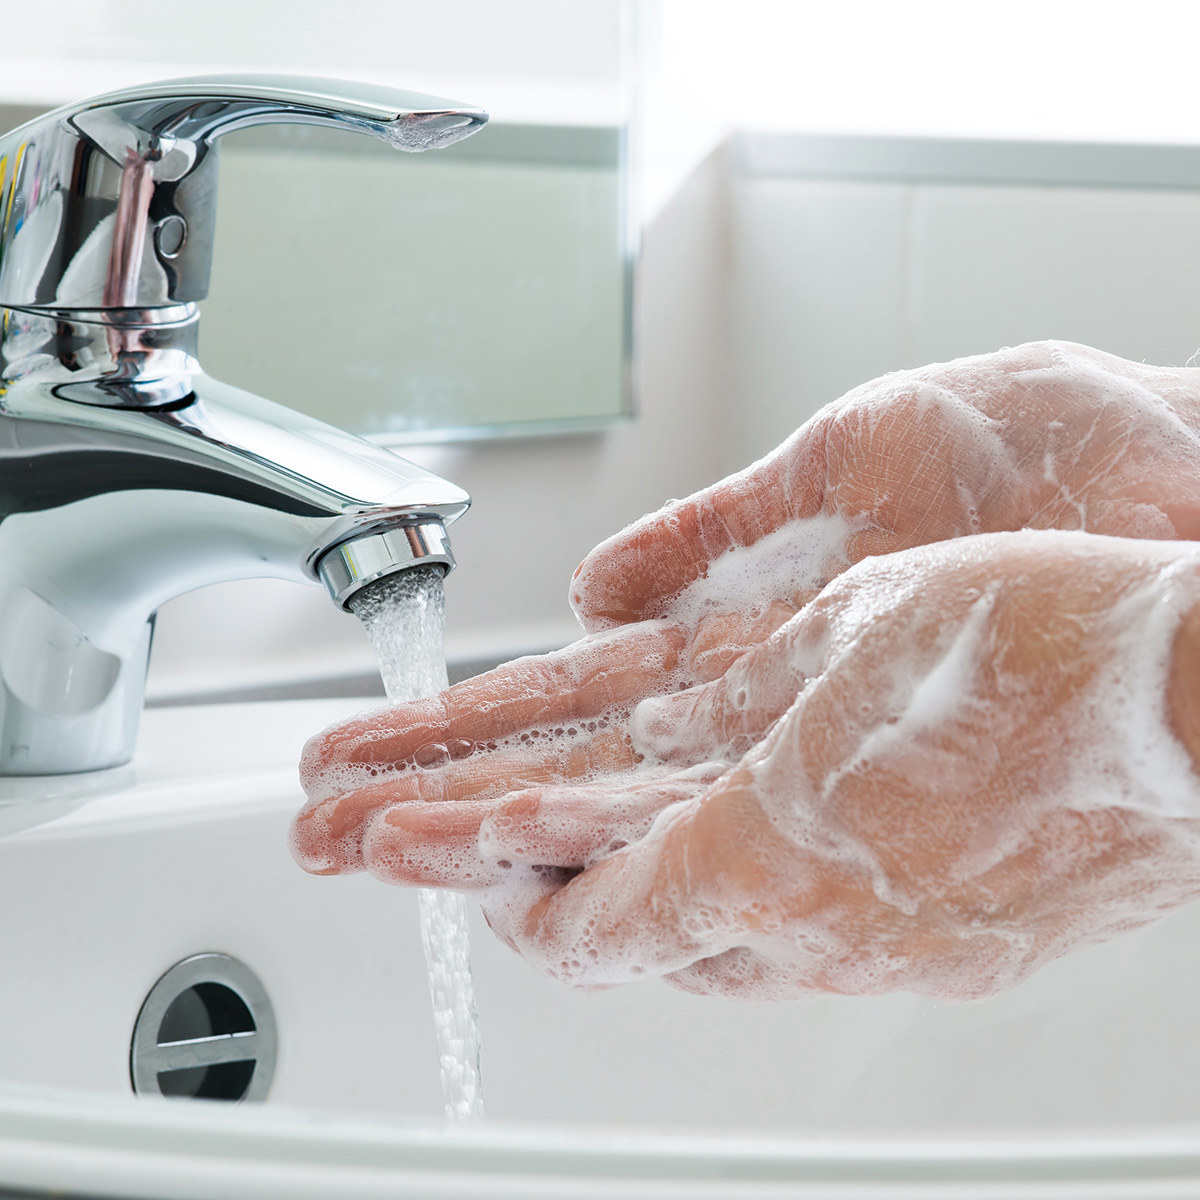 Person vigorously washing hands in sink